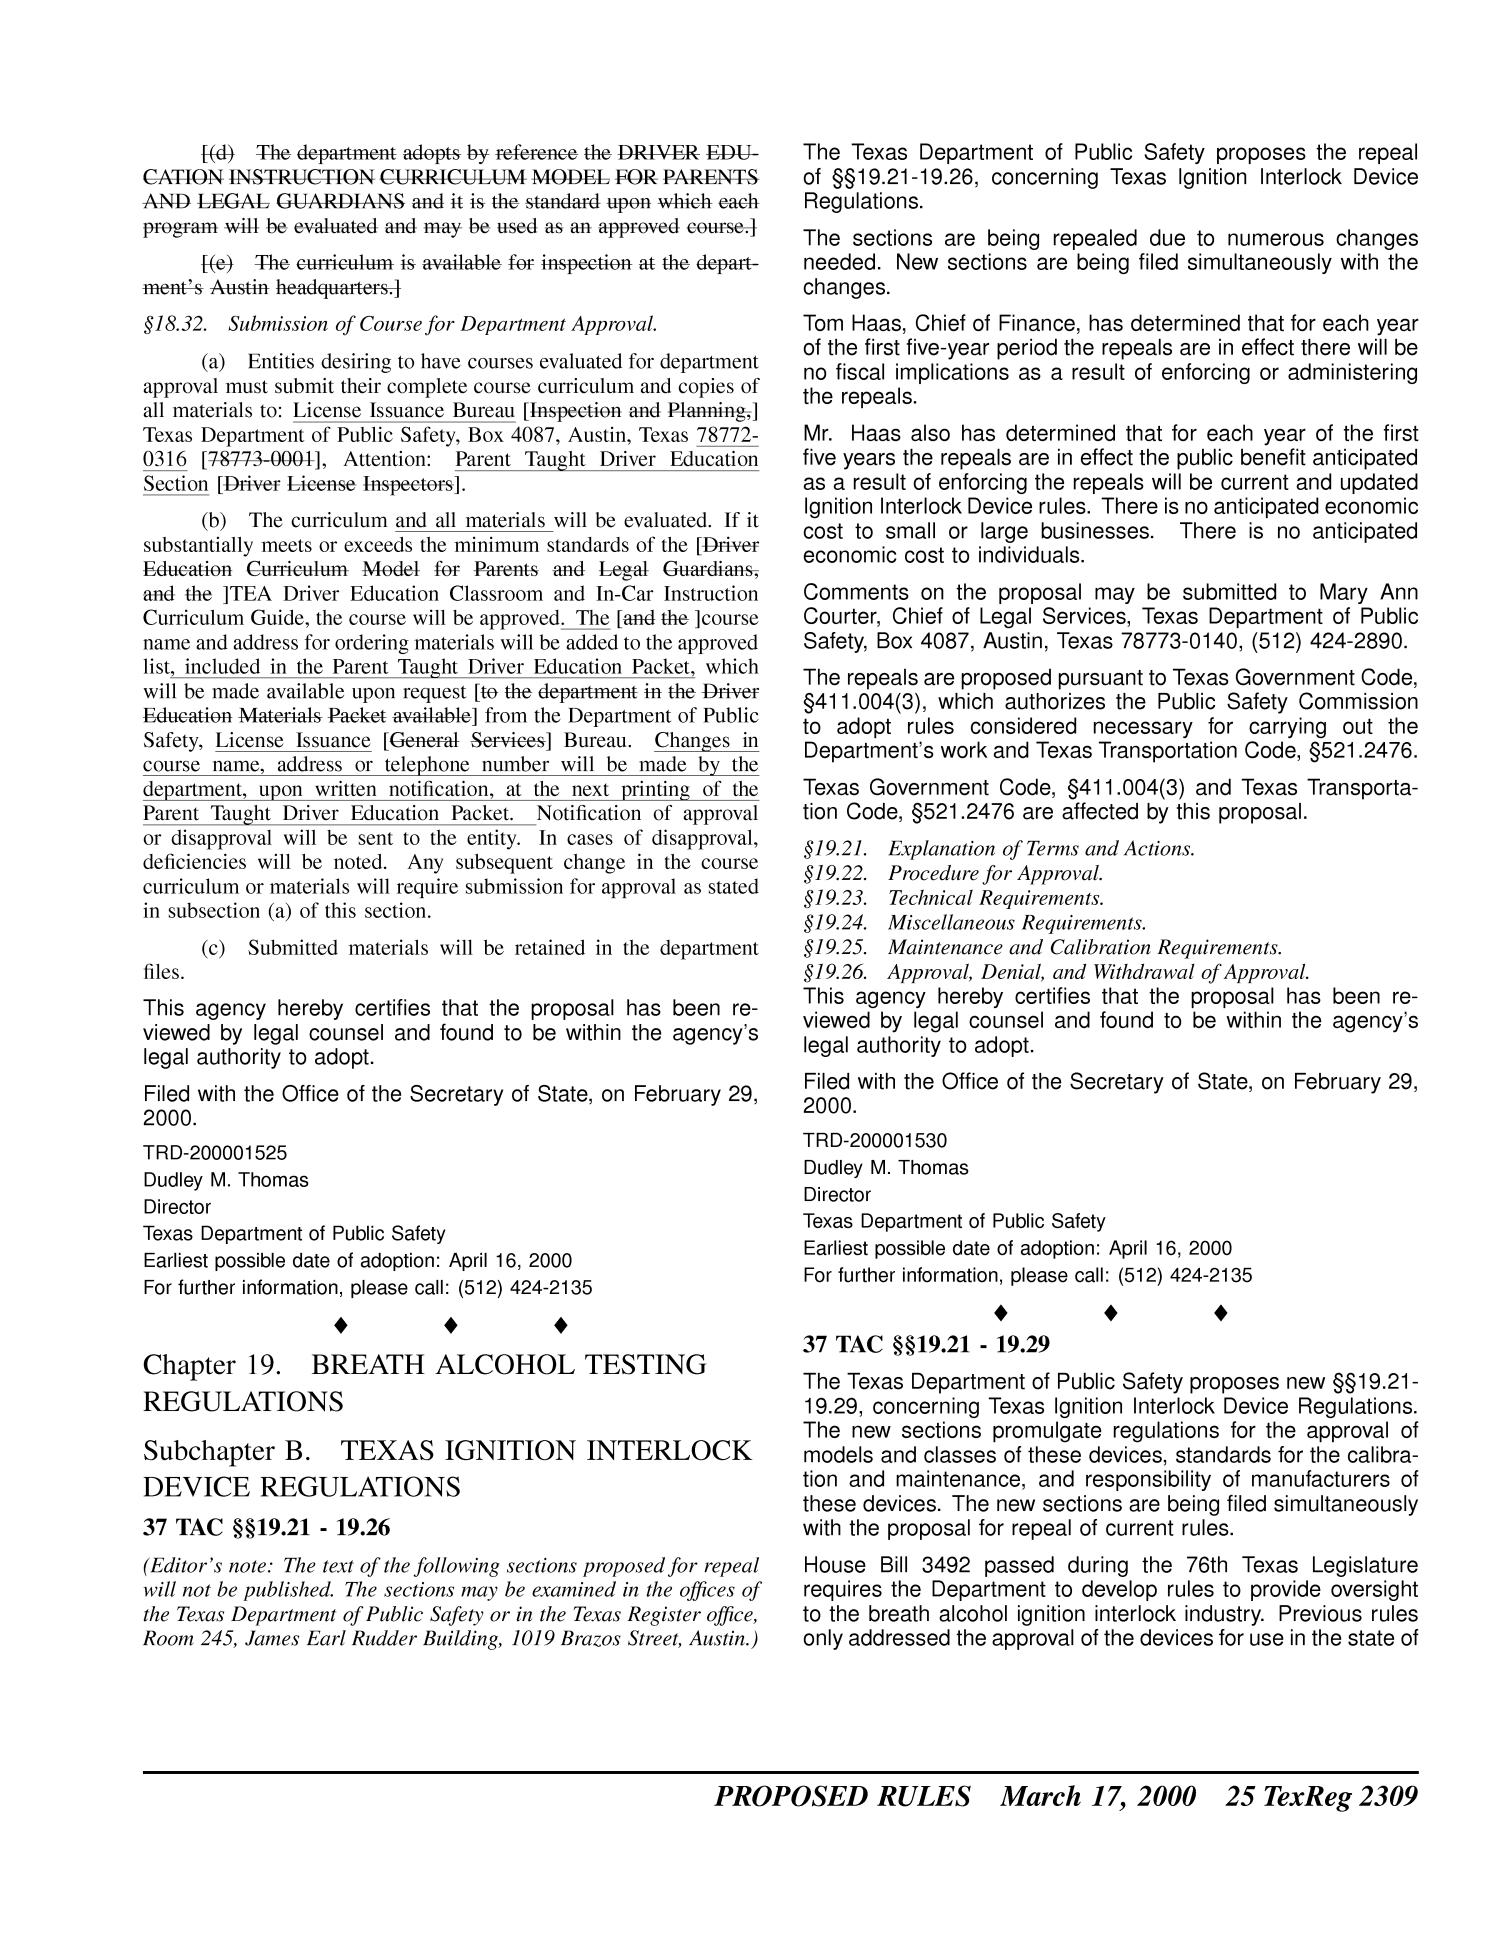 Texas Register, Volume 25, Number 11, Pages 2223-2484, March 17, 2000
                                                
                                                    2309
                                                